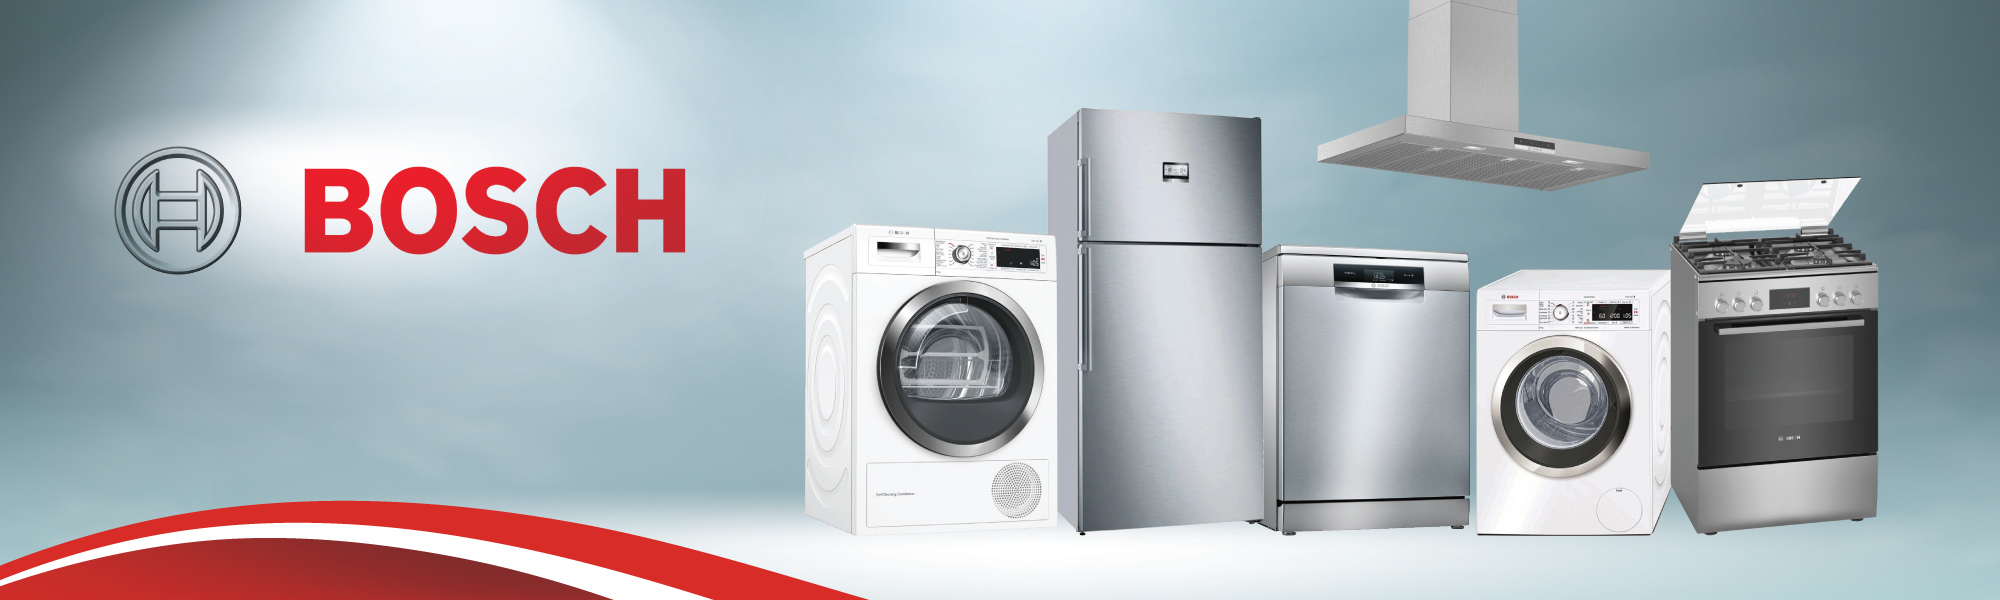 Bosch Service Center : Specialized in repair of Washing Machine, Tumble dryer, Refrigerator, Dishwasher, Cooker, Hood.